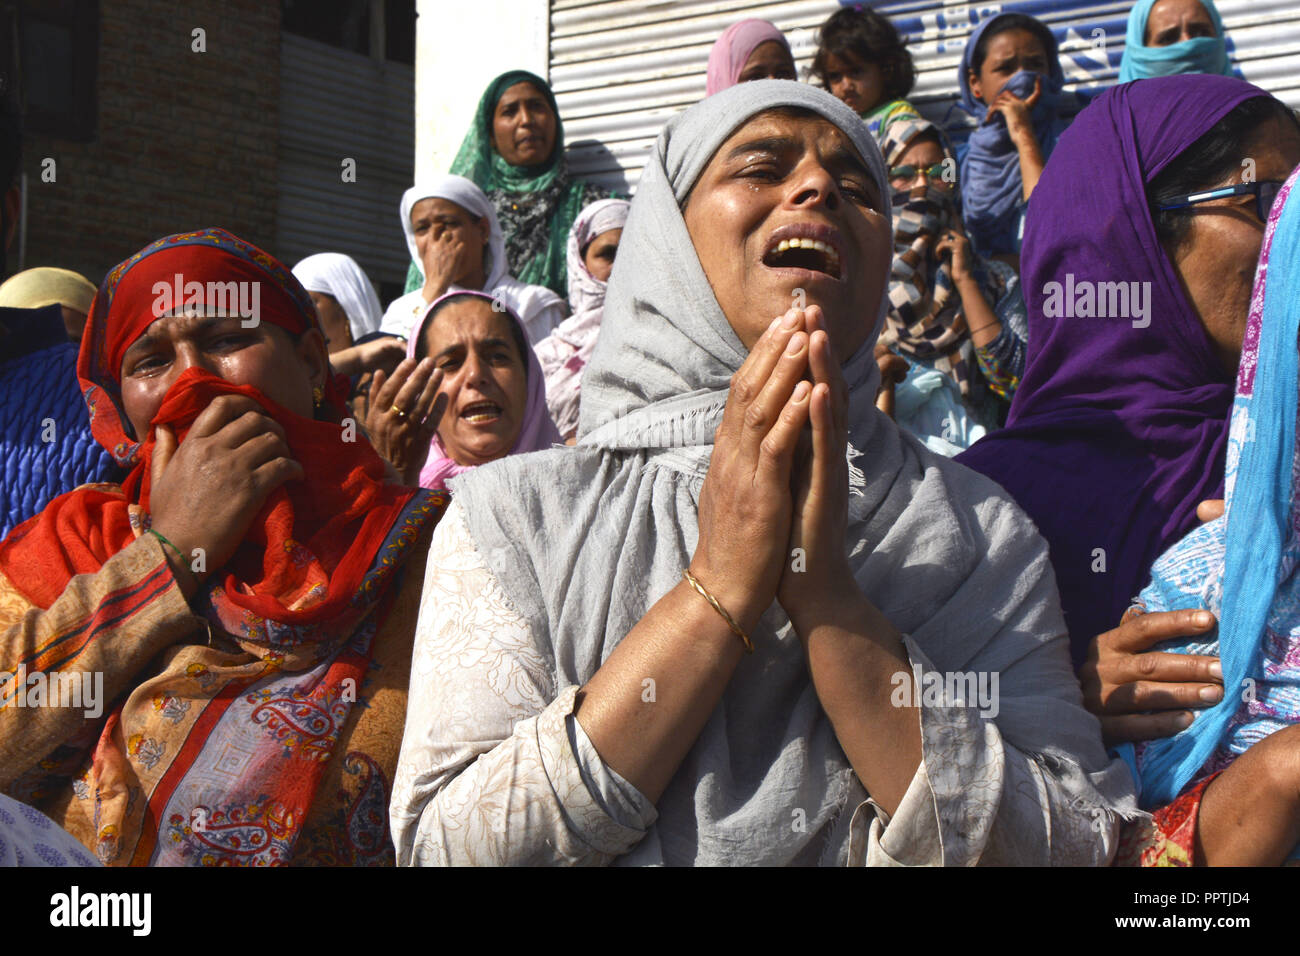 Srinagar, Jammu and Kashmir, . 27th Sep, 2018. Kashmiri women seen mourning at the funeral of Saleem Malik.Thousands of Kashmiri people attend the funeral of 26 years old Saleem Malik, a civilian who was shot dead by n army at his home. Saleem was killed during a gunfight between n army and Militants at the Noorbagh area of Srinagar, the summer capital of n administered Kashmir. Credit: Masrat Zahra/SOPA Images/ZUMA Wire/Alamy Live News Stock Photo